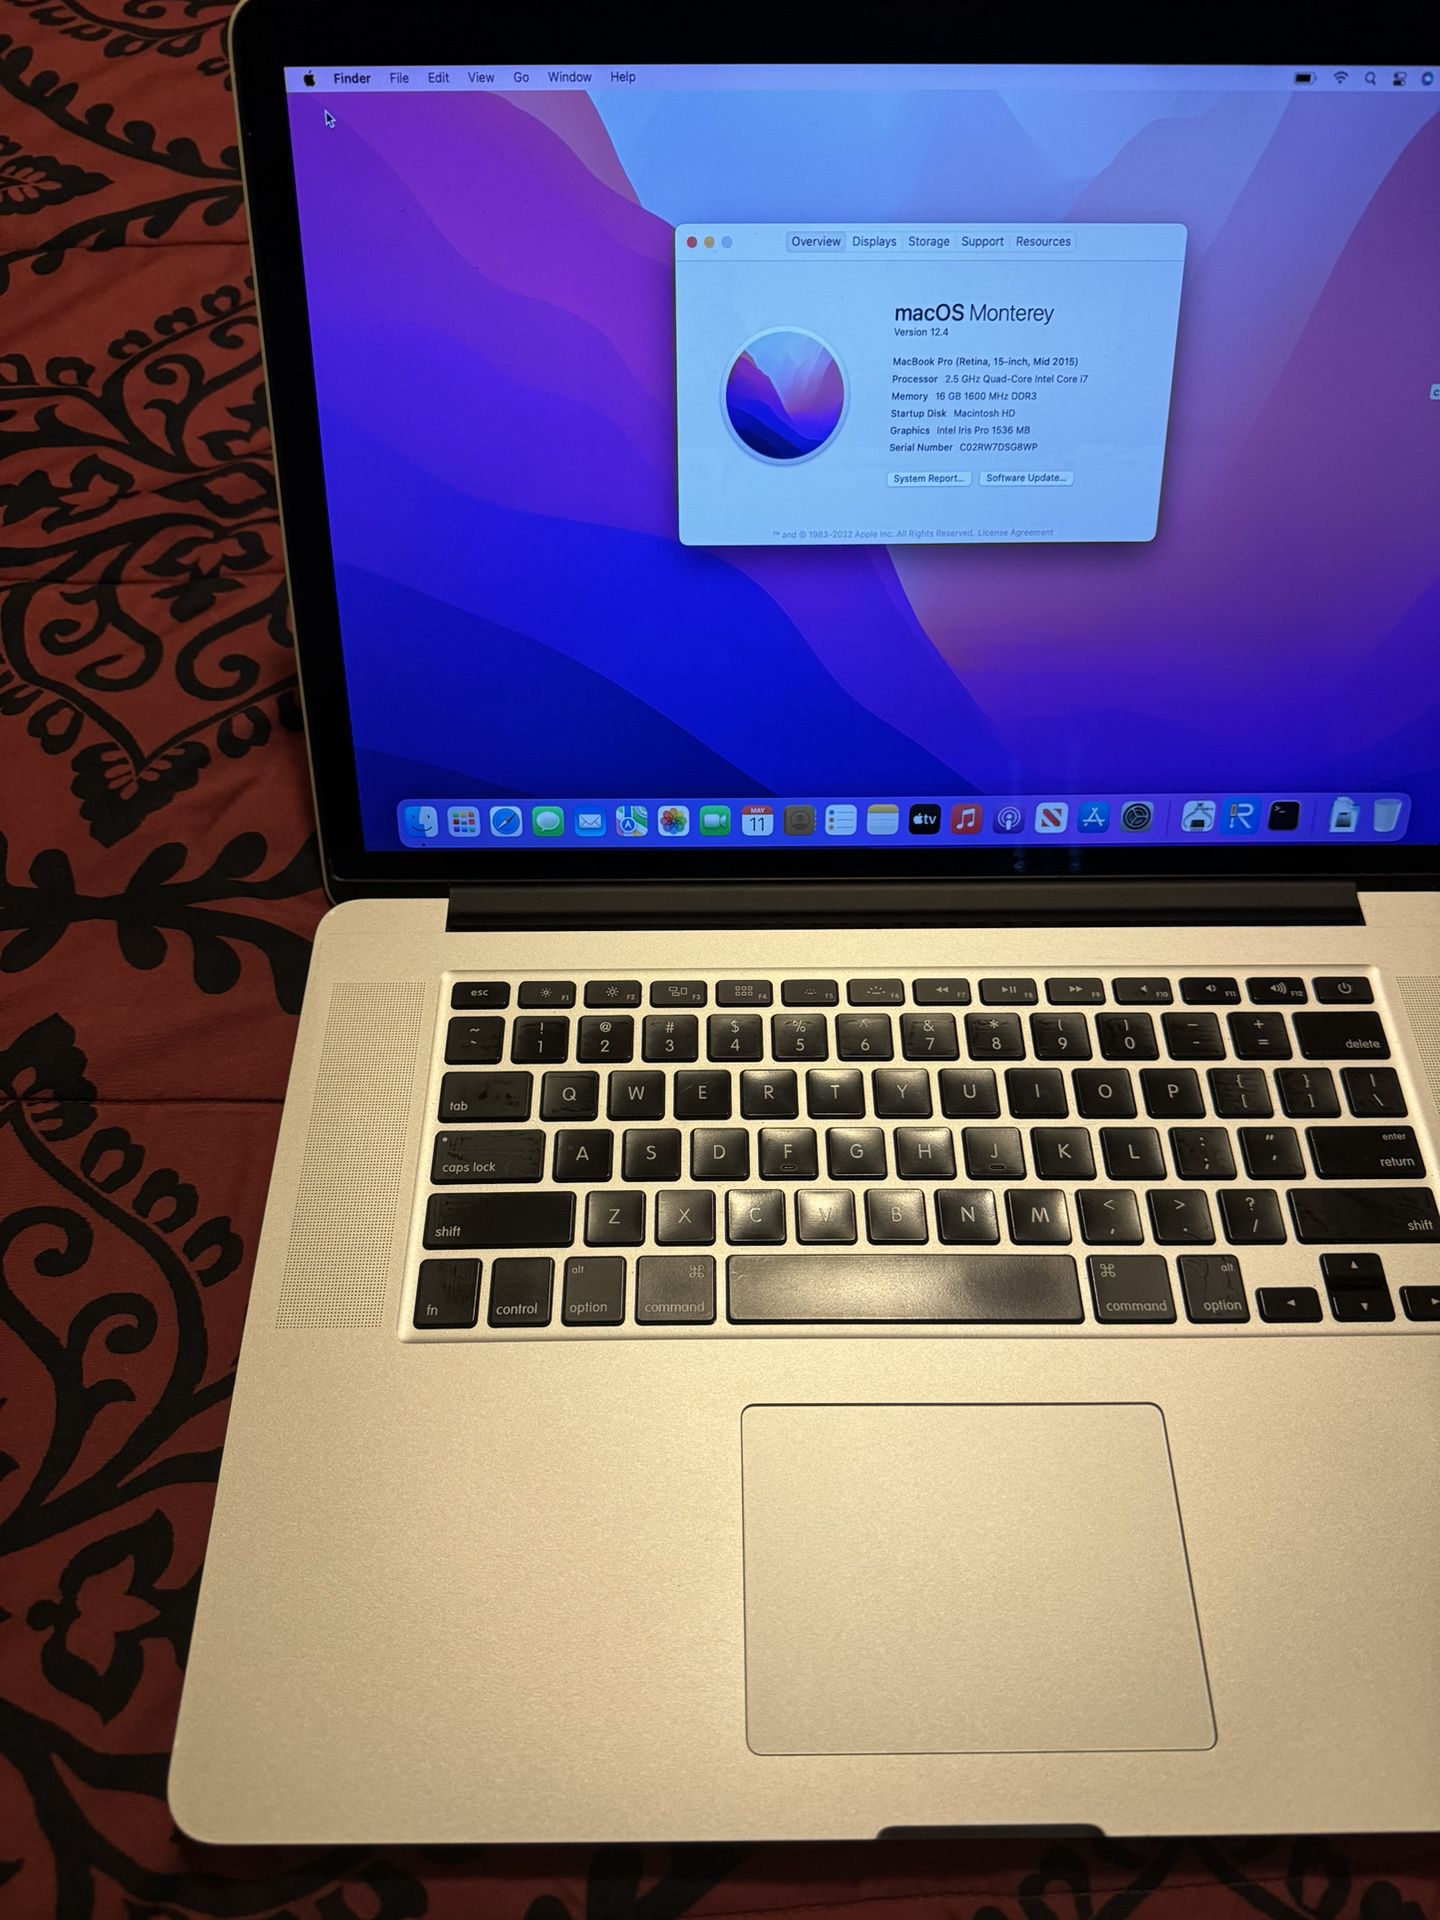 MacBook Pro 2015 (15-inch) i7, No Scratches, No Dents/Dings…Excellent Condition, Ready to Go!!!